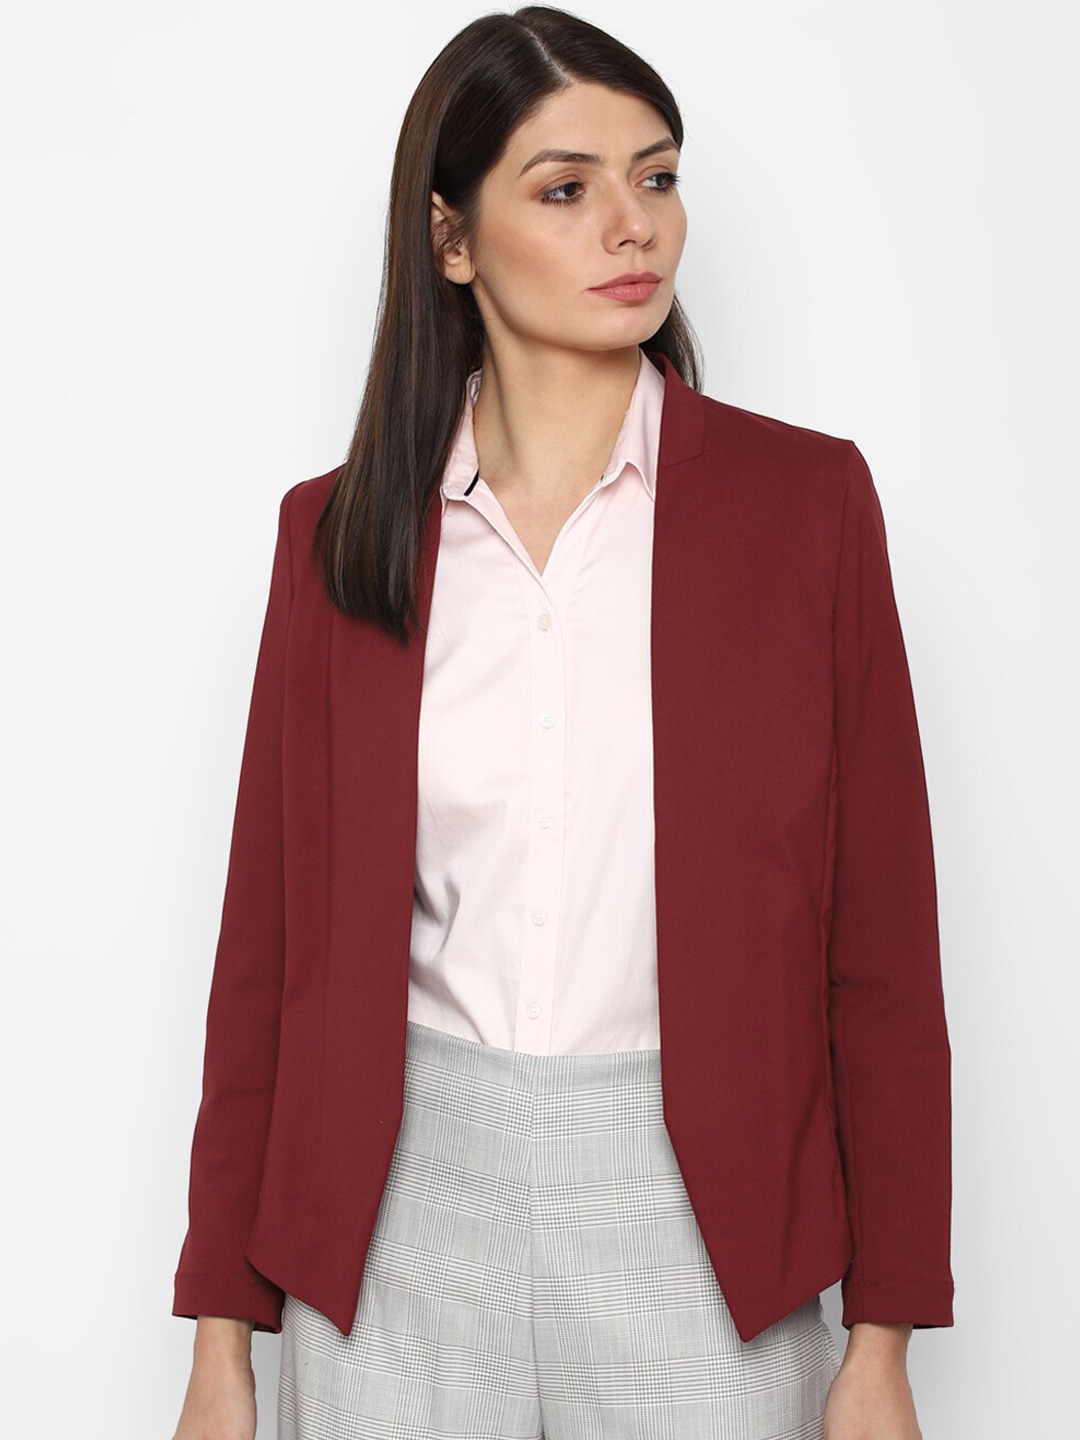 Clothing Blazers | Allen Solly Woman Maroon Solid Single-Breasted Casual Blazer - GD66504